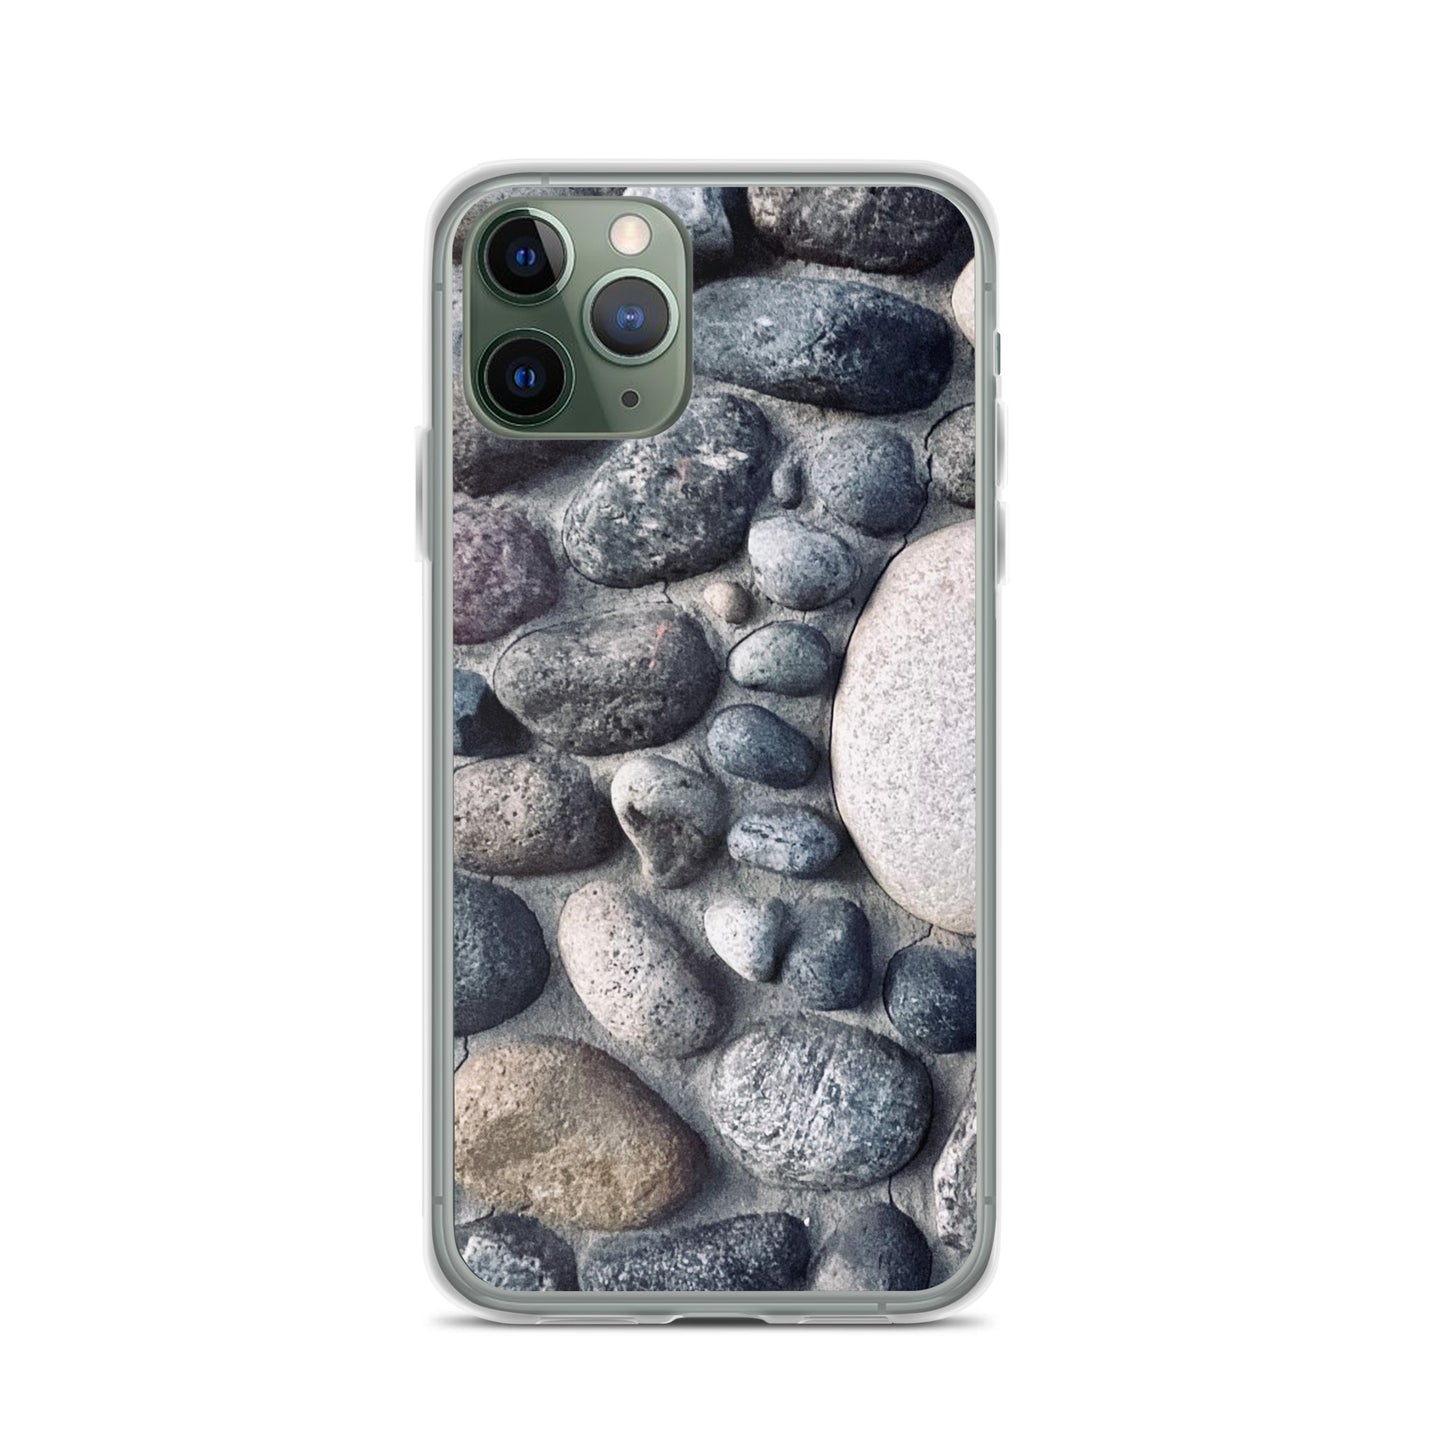 Rock n Rocks n More Rocks (iPhone Case) - Comfortable Culture - iPhone 11 Pro - Mobile Phone Cases - Comfortable Culture